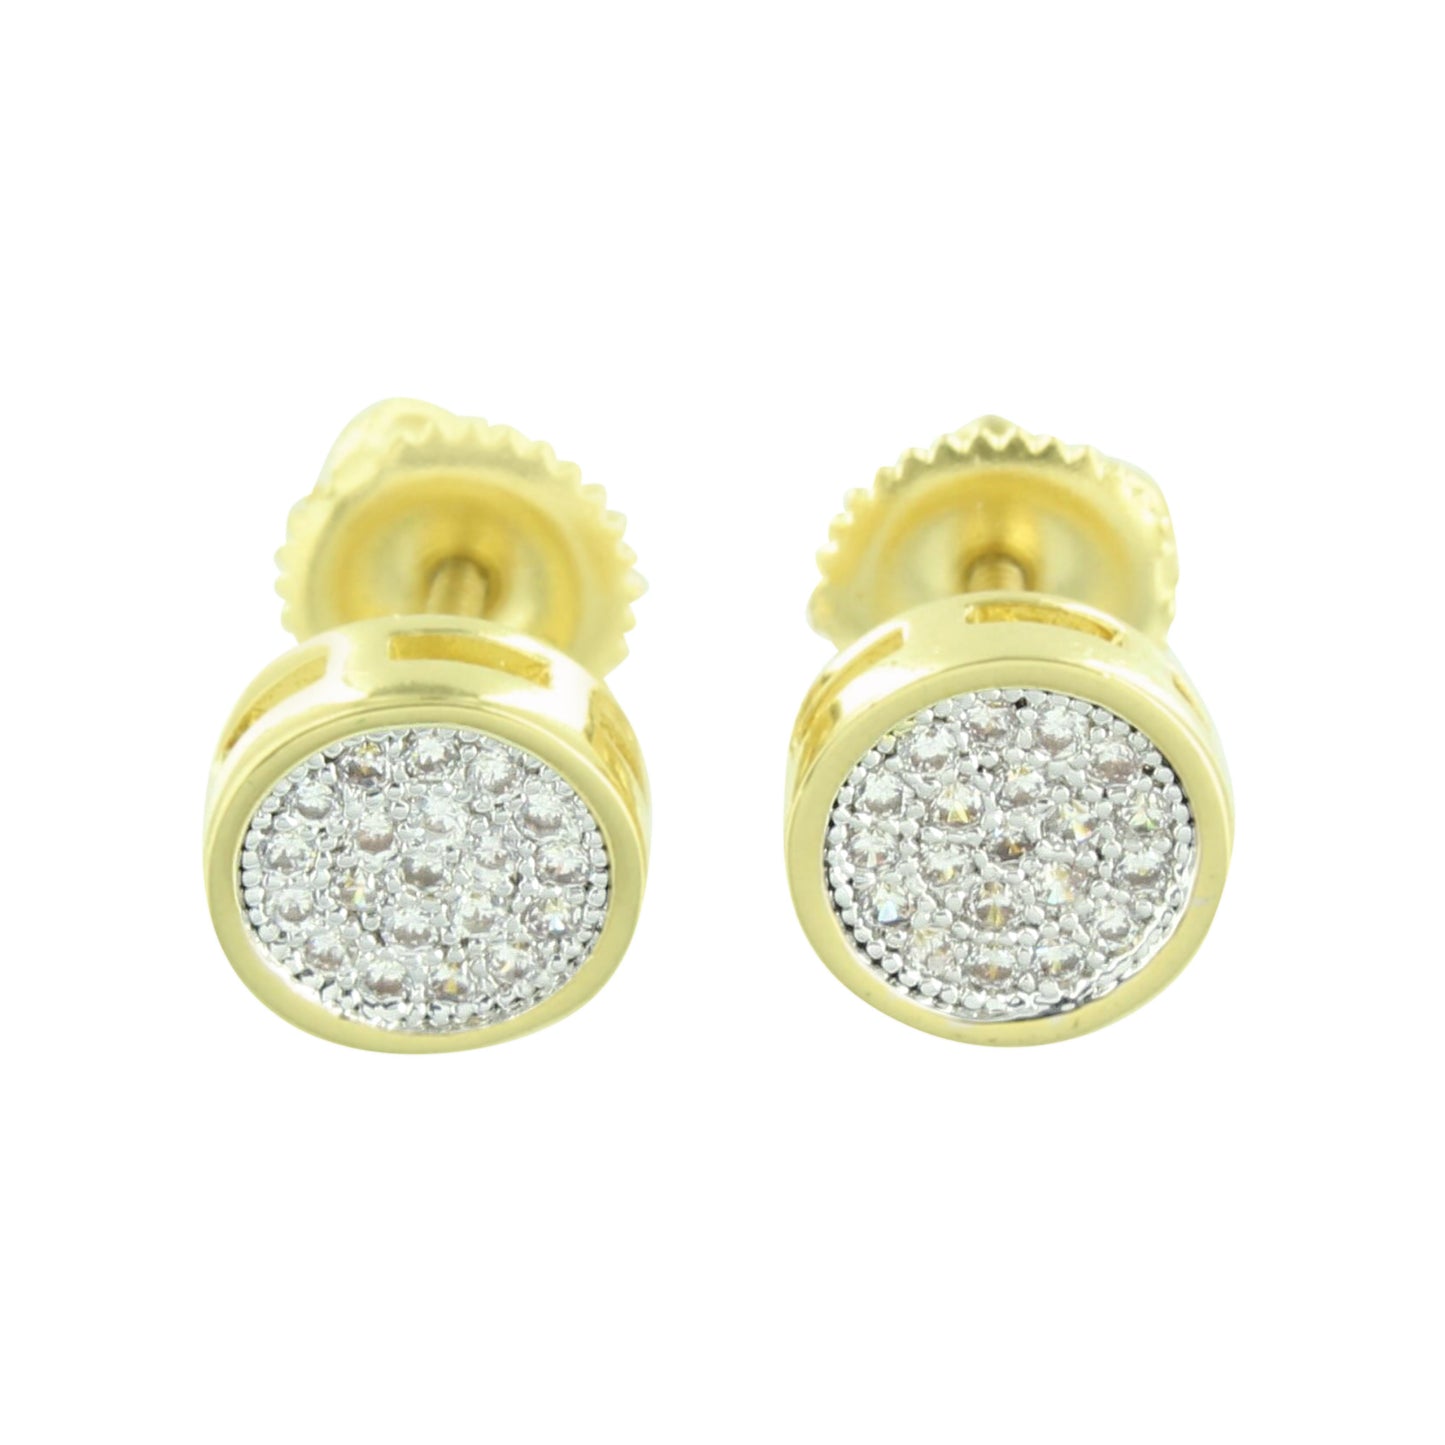 Gold Finish Round Earrings Studs Screw Back 7 MM